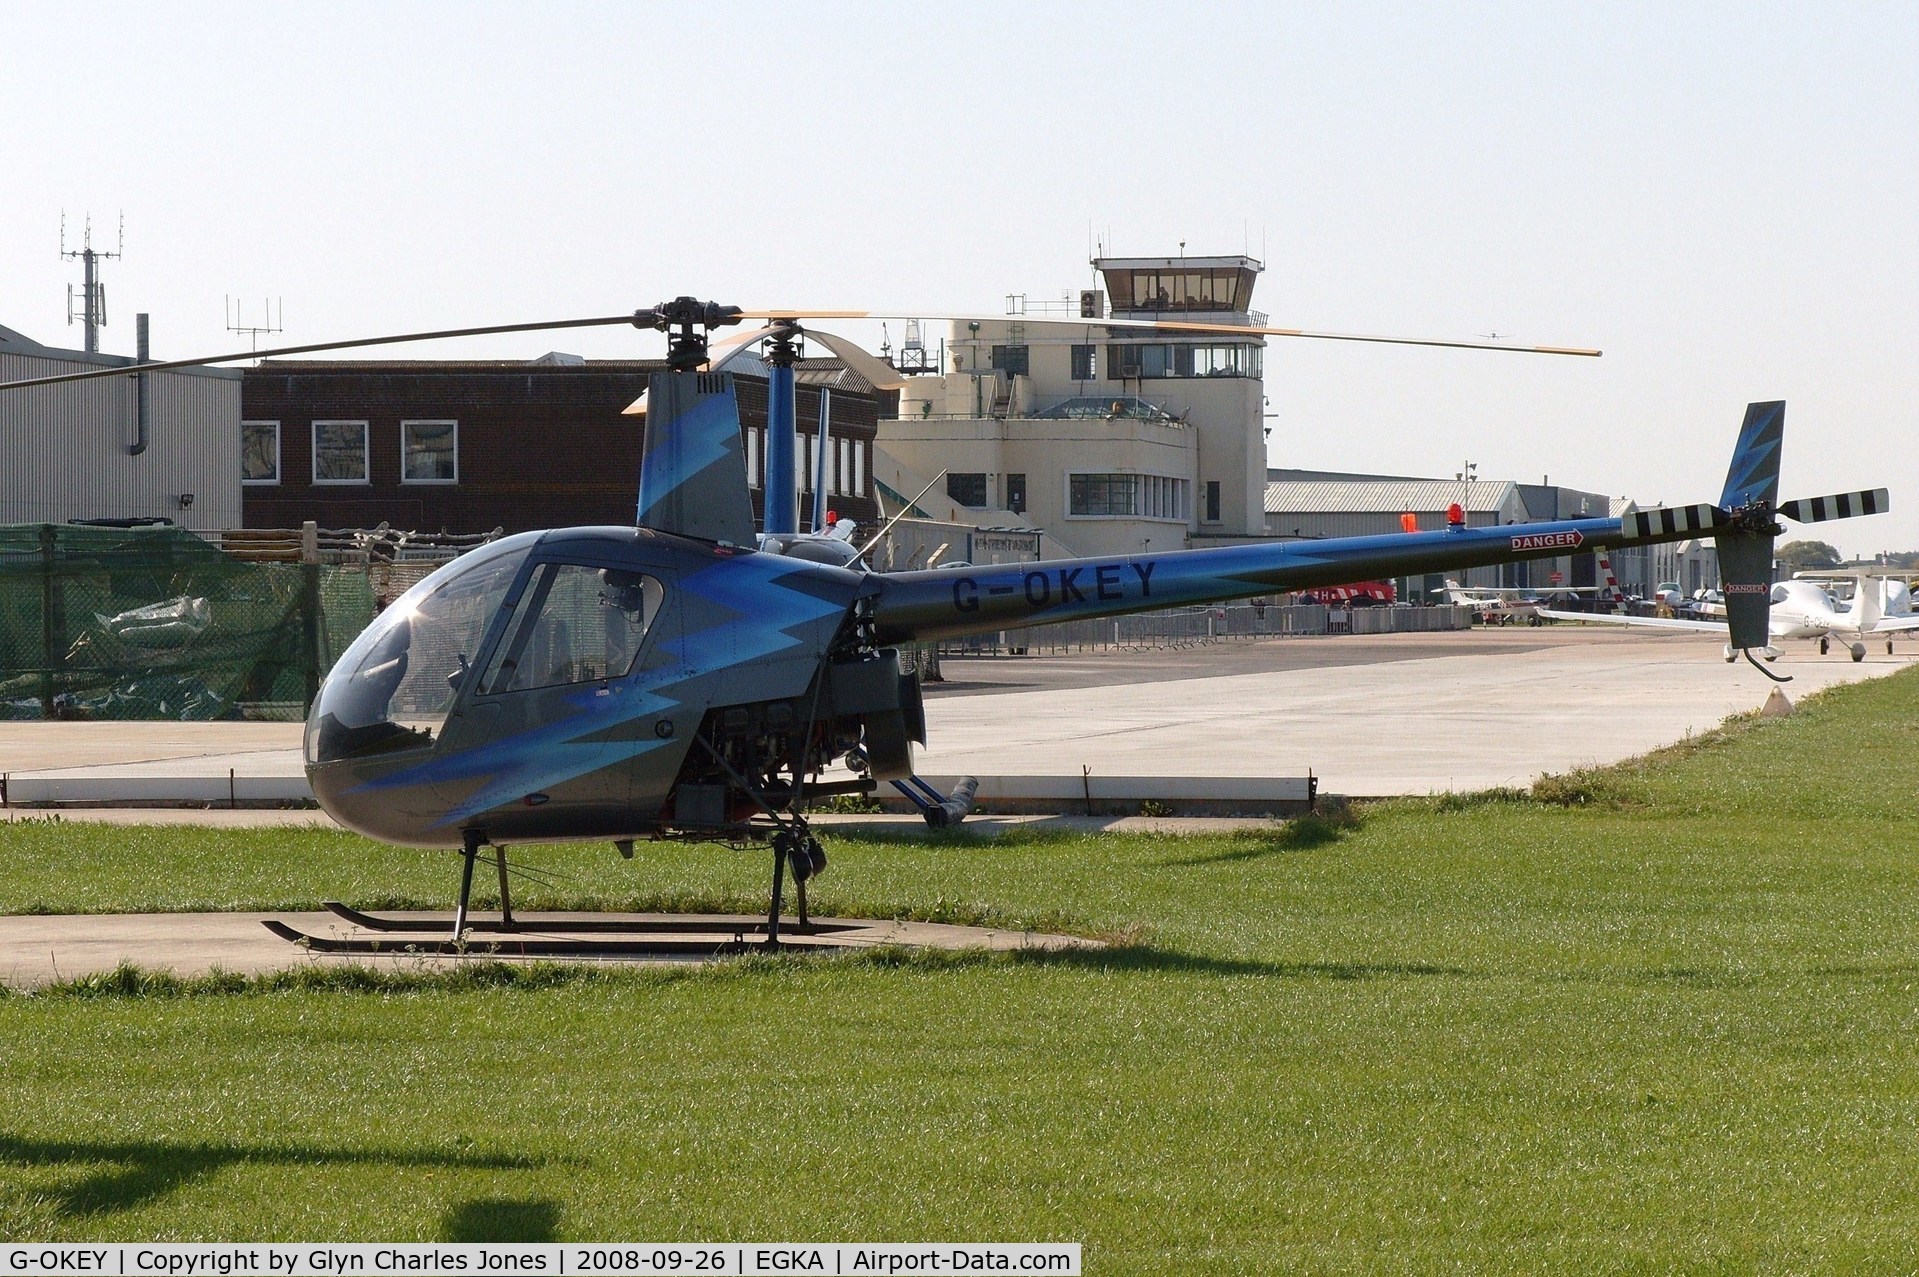 G-OKEY, 1991 Robinson R22 Beta C/N 2004, Operated by Fast Helicopters Ltd.